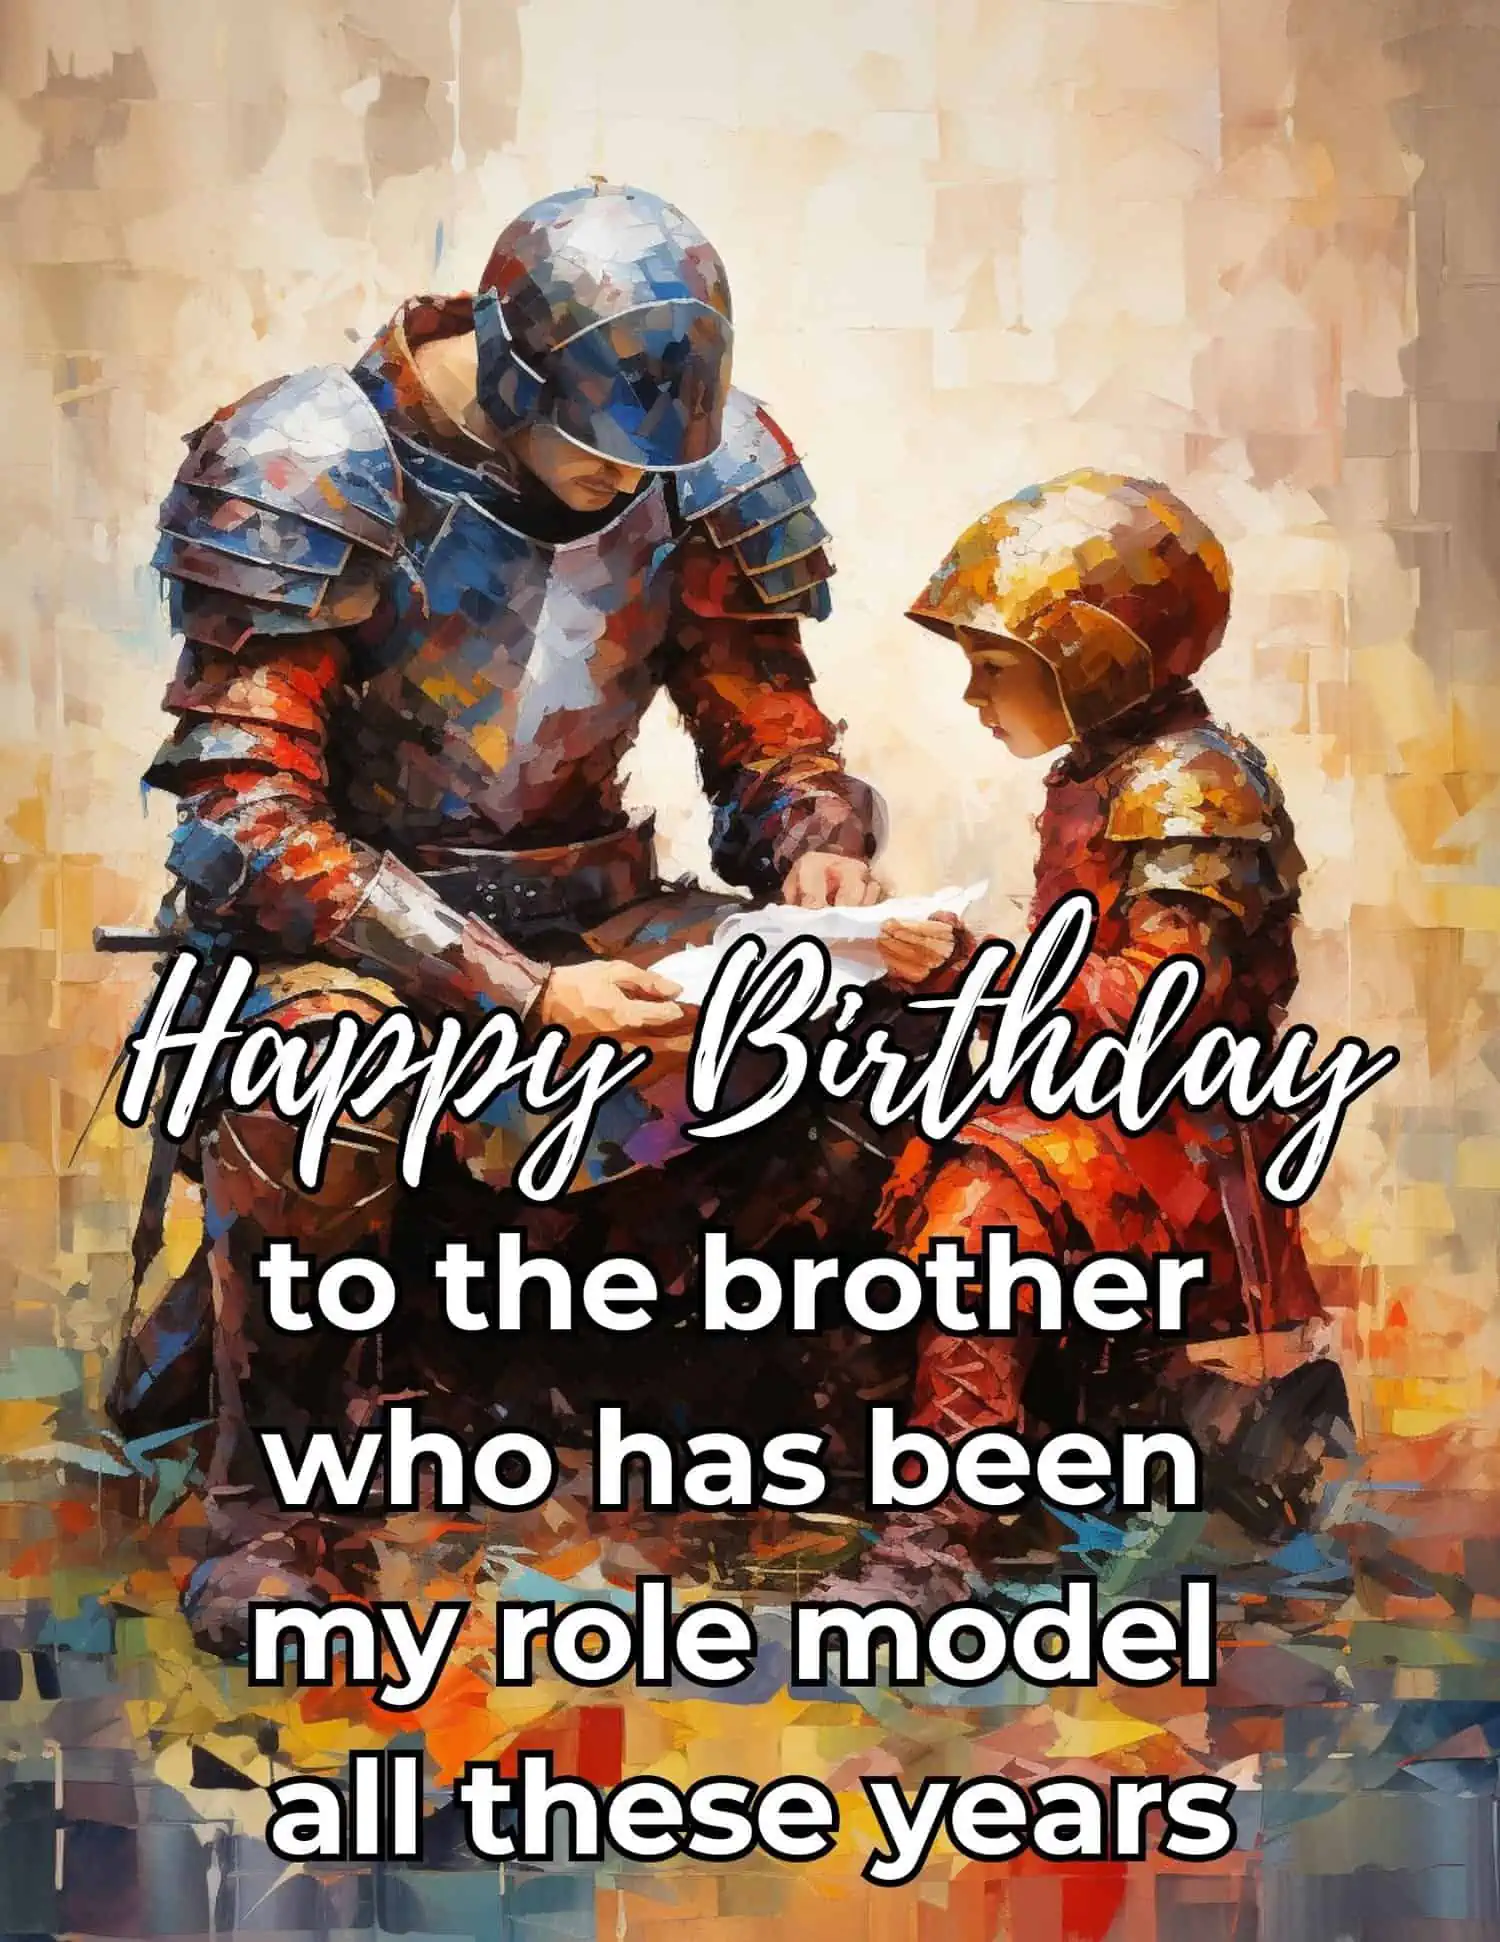 105 Best Birthday Wishes for Brother - Birthday Messages for Brother